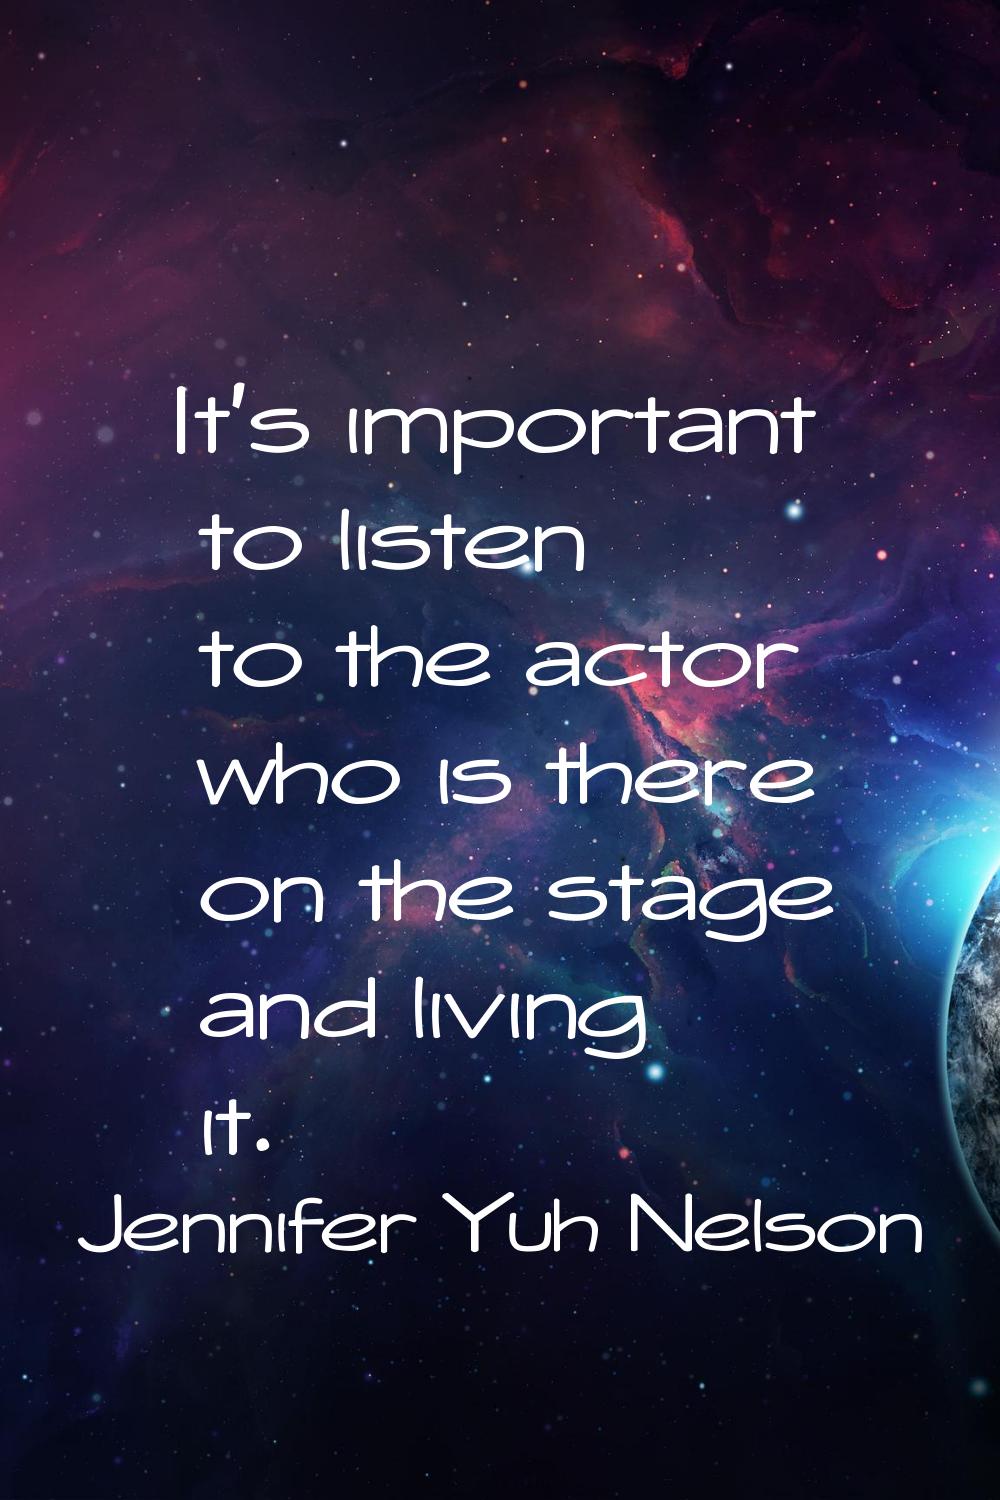 It's important to listen to the actor who is there on the stage and living it.